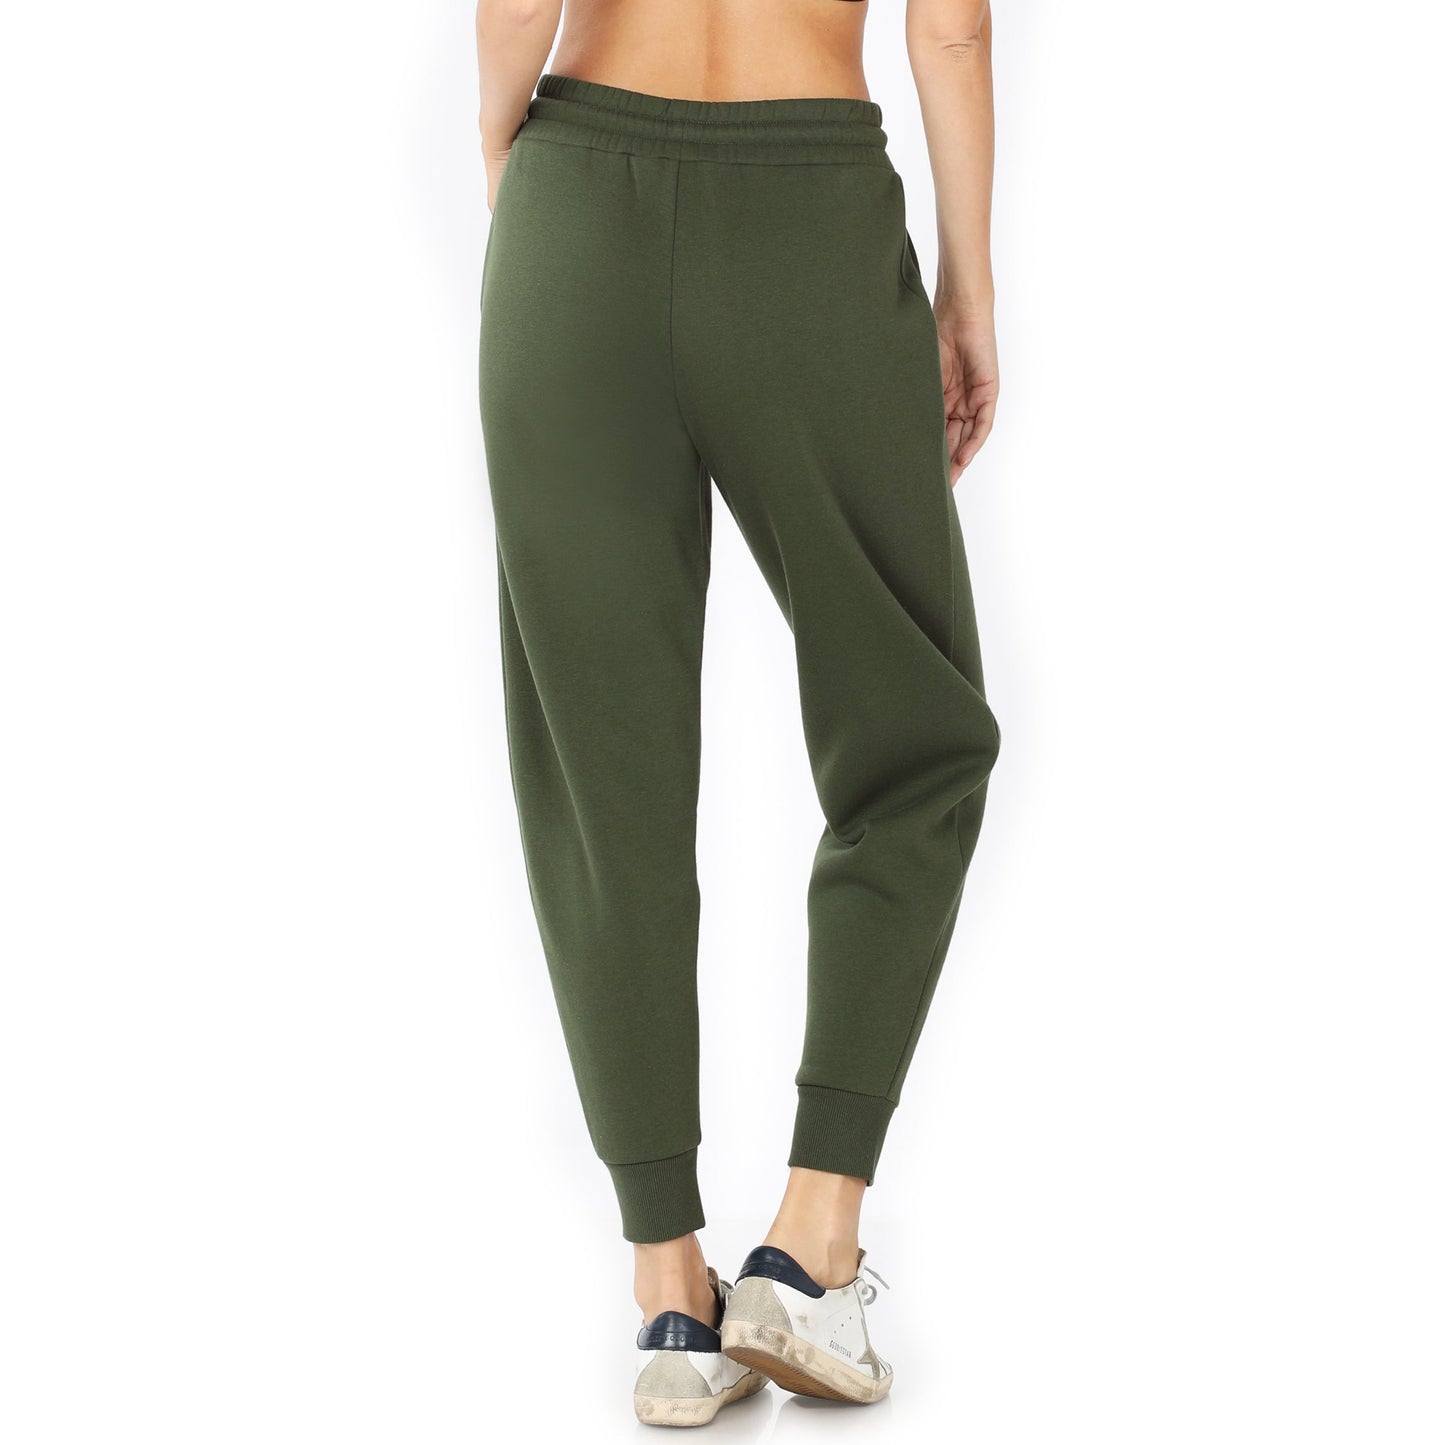 Women's Cotton Blend Relax Fit Cropped Jogger Lounge Sweatpants Running Pants